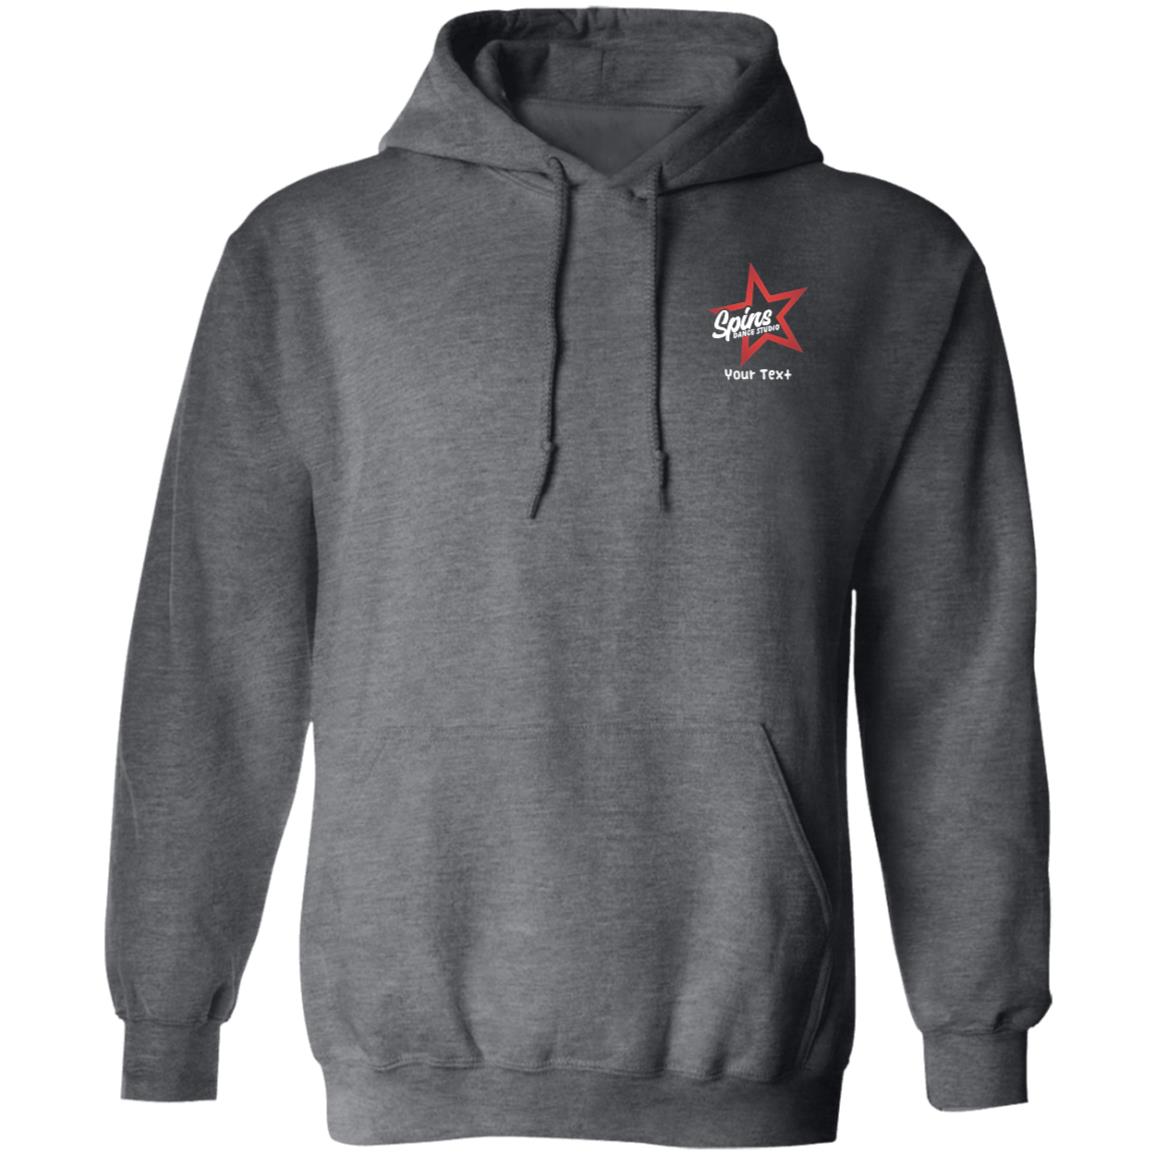 Spins Pullover Hoodie - With Personalization